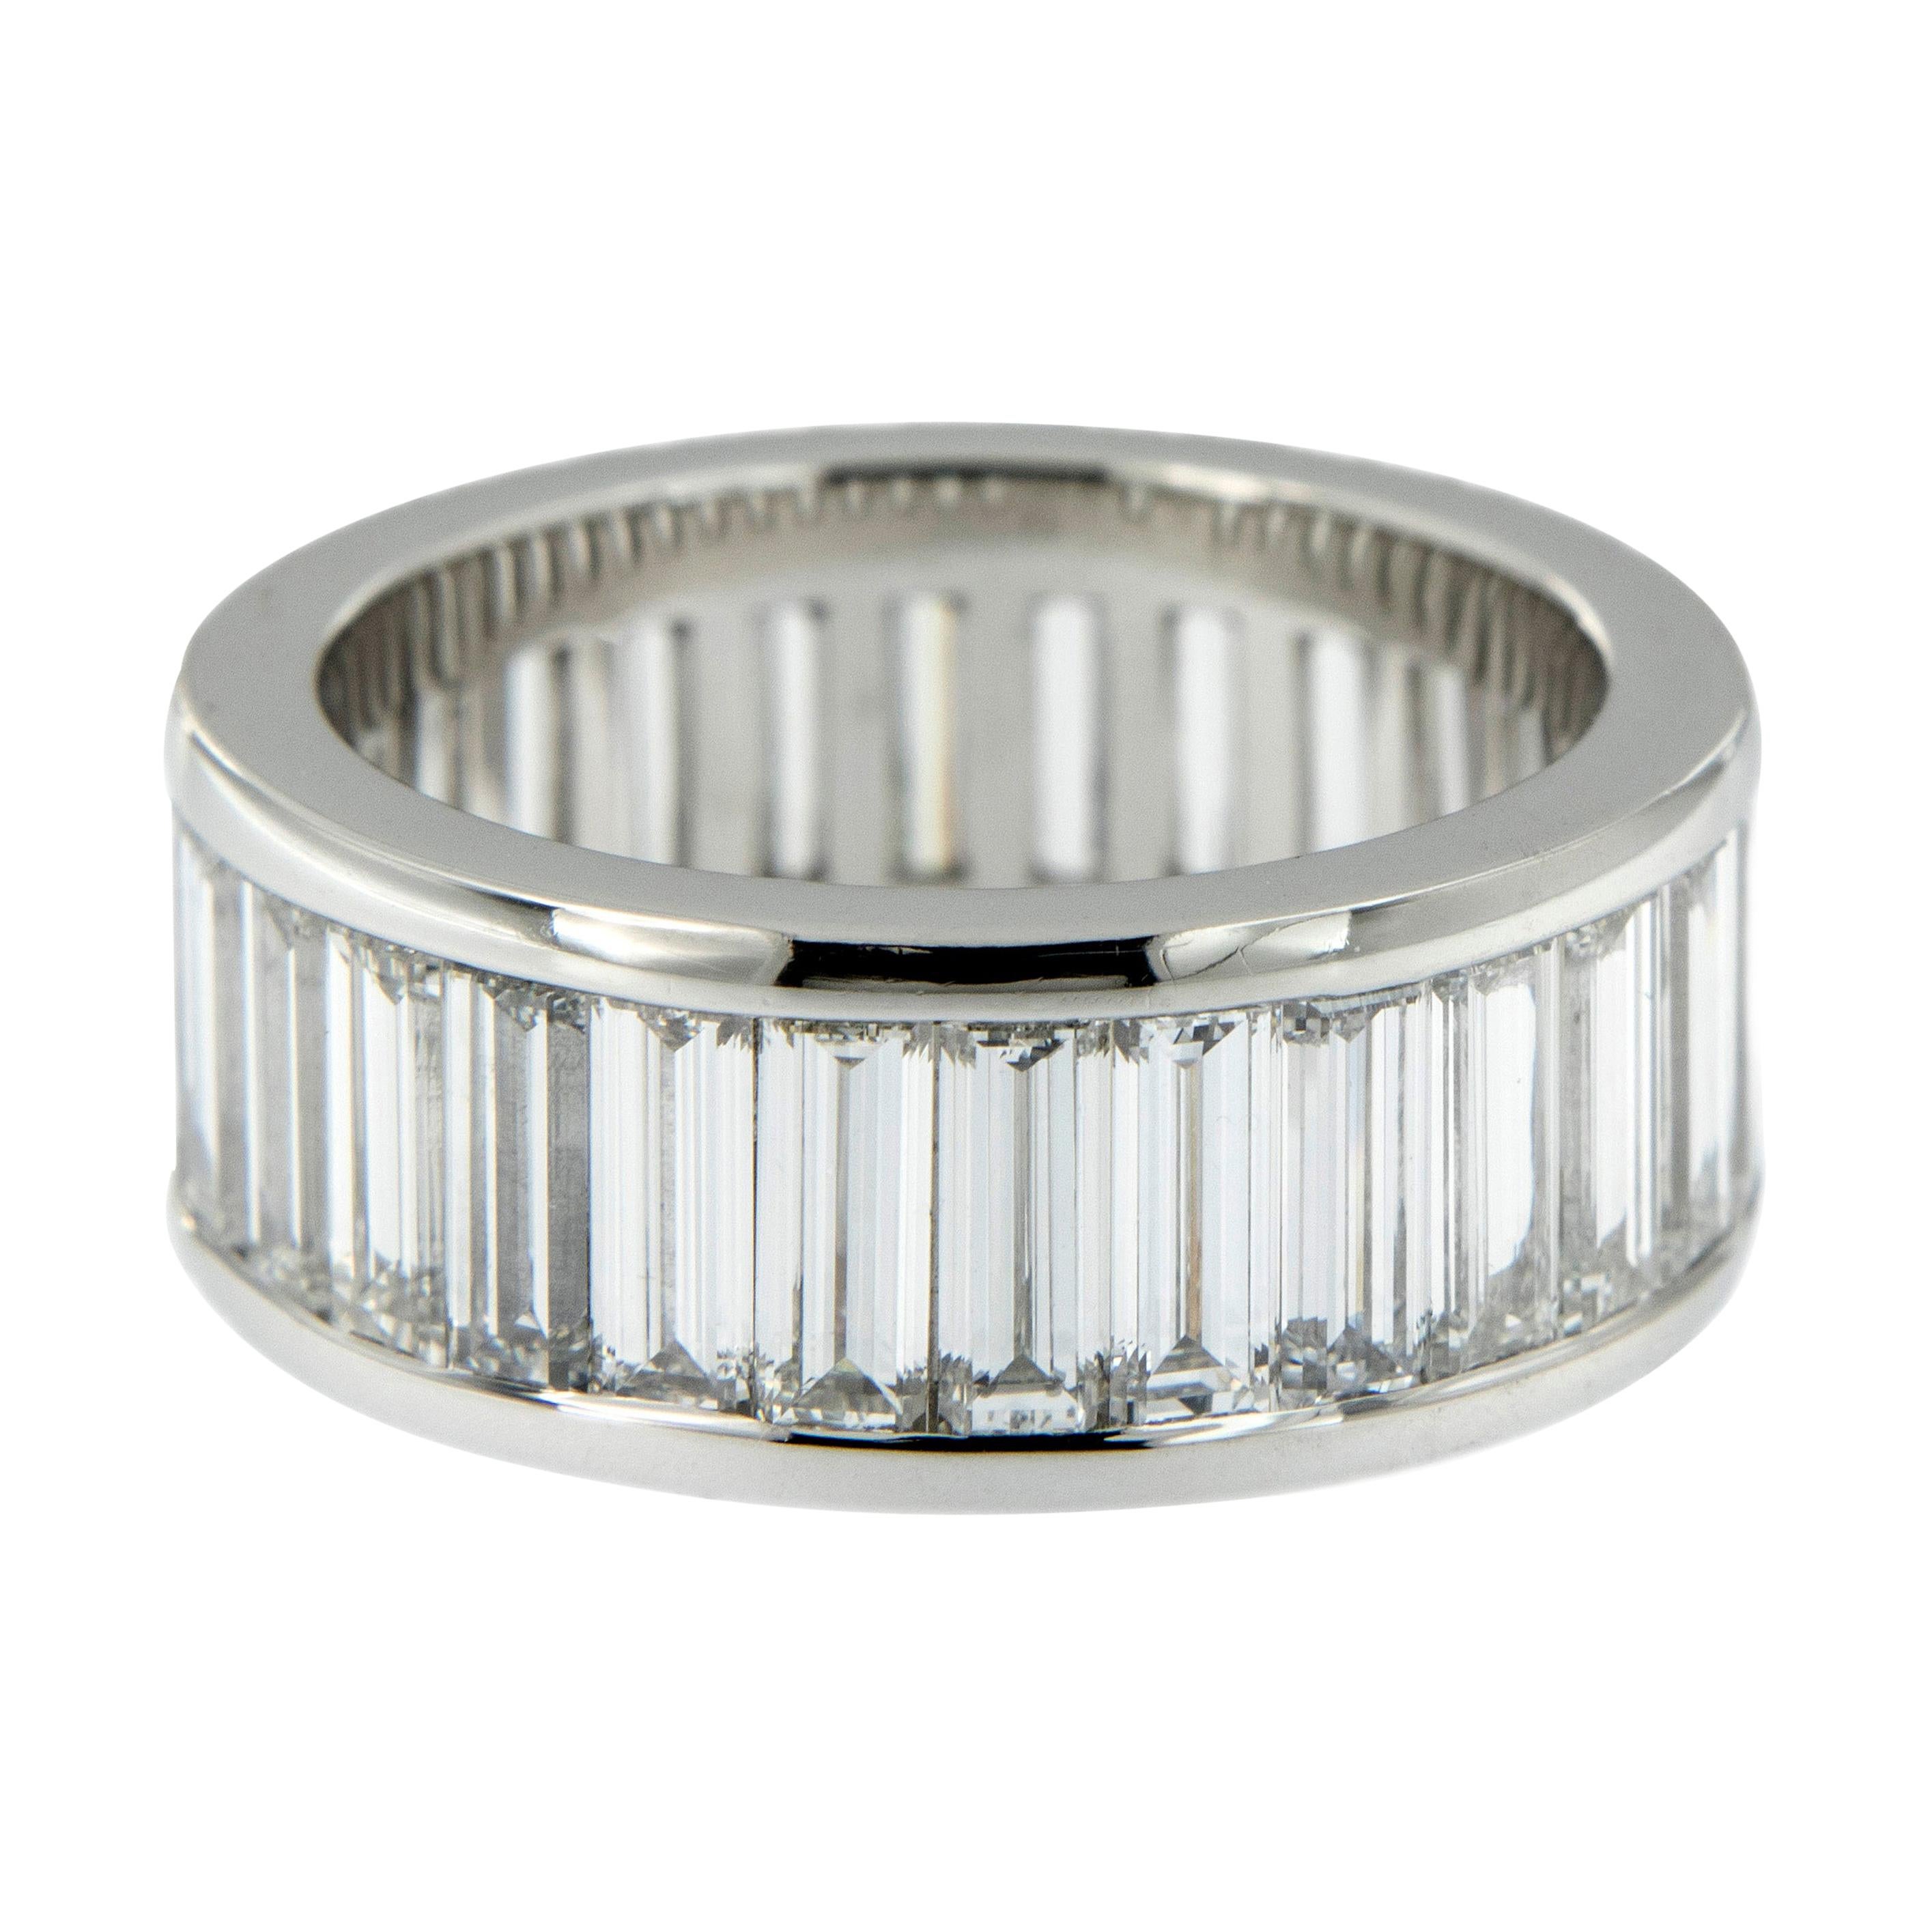 Platinum Diamond Baguette Eternity Band of the Finest Quality